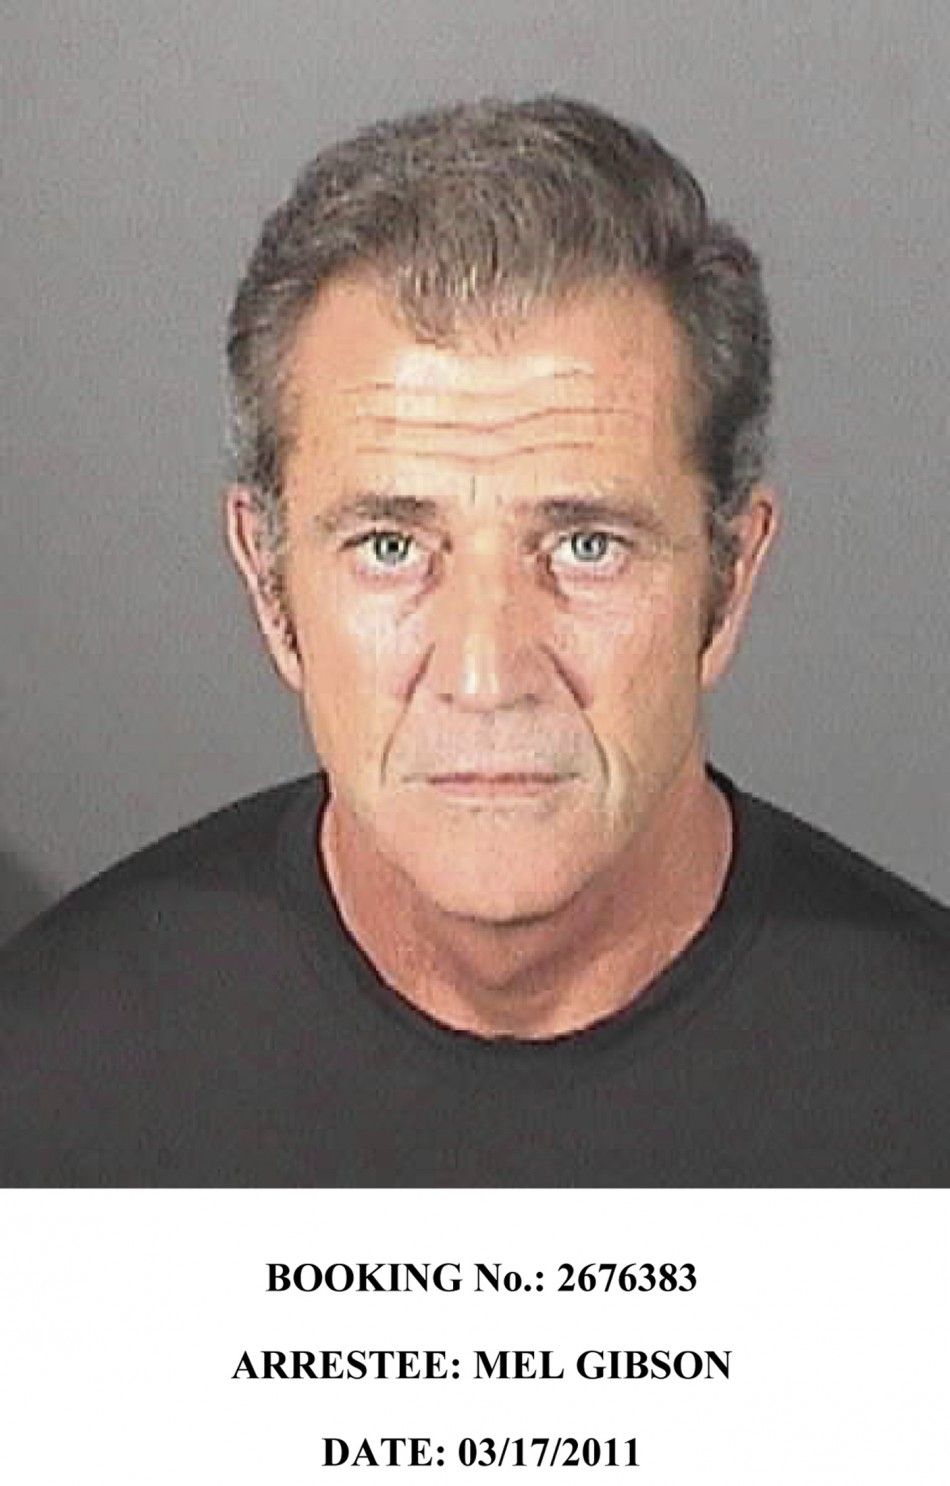 Handout of Mel Gibson in a booking photo from the El Segundo police department